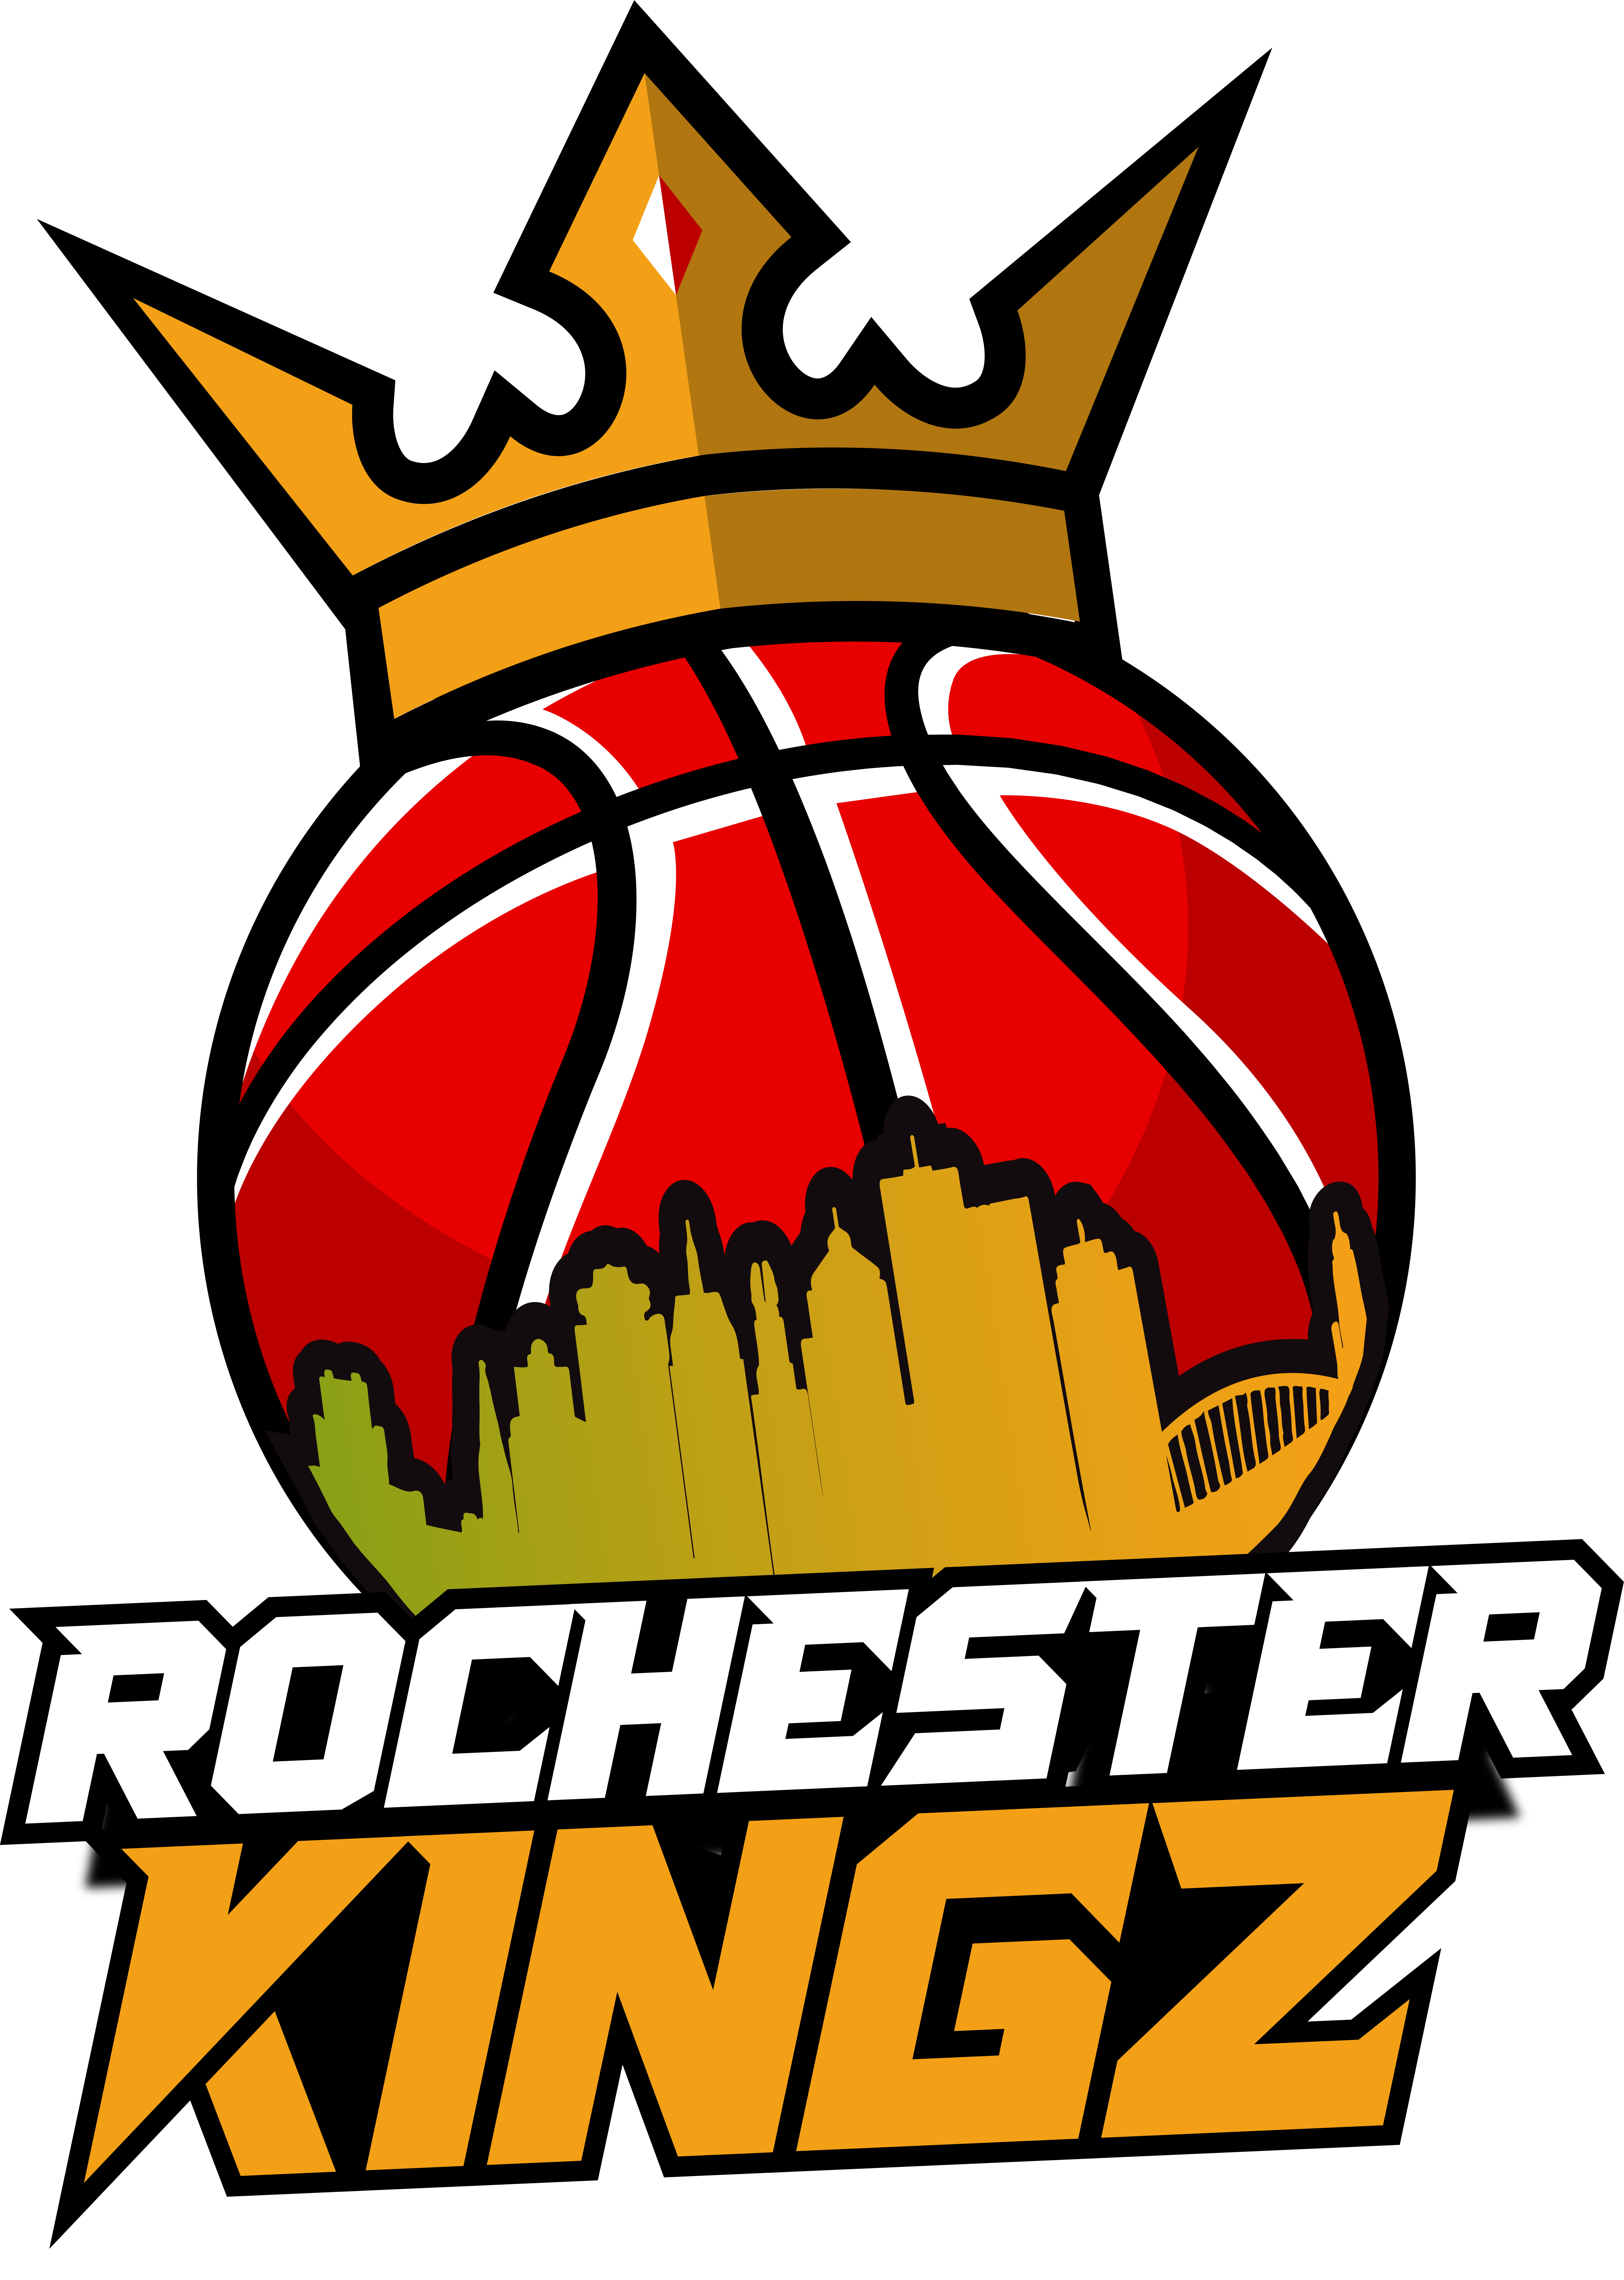 ROCHESTER KINGZ SET TO BEGIN PLAY